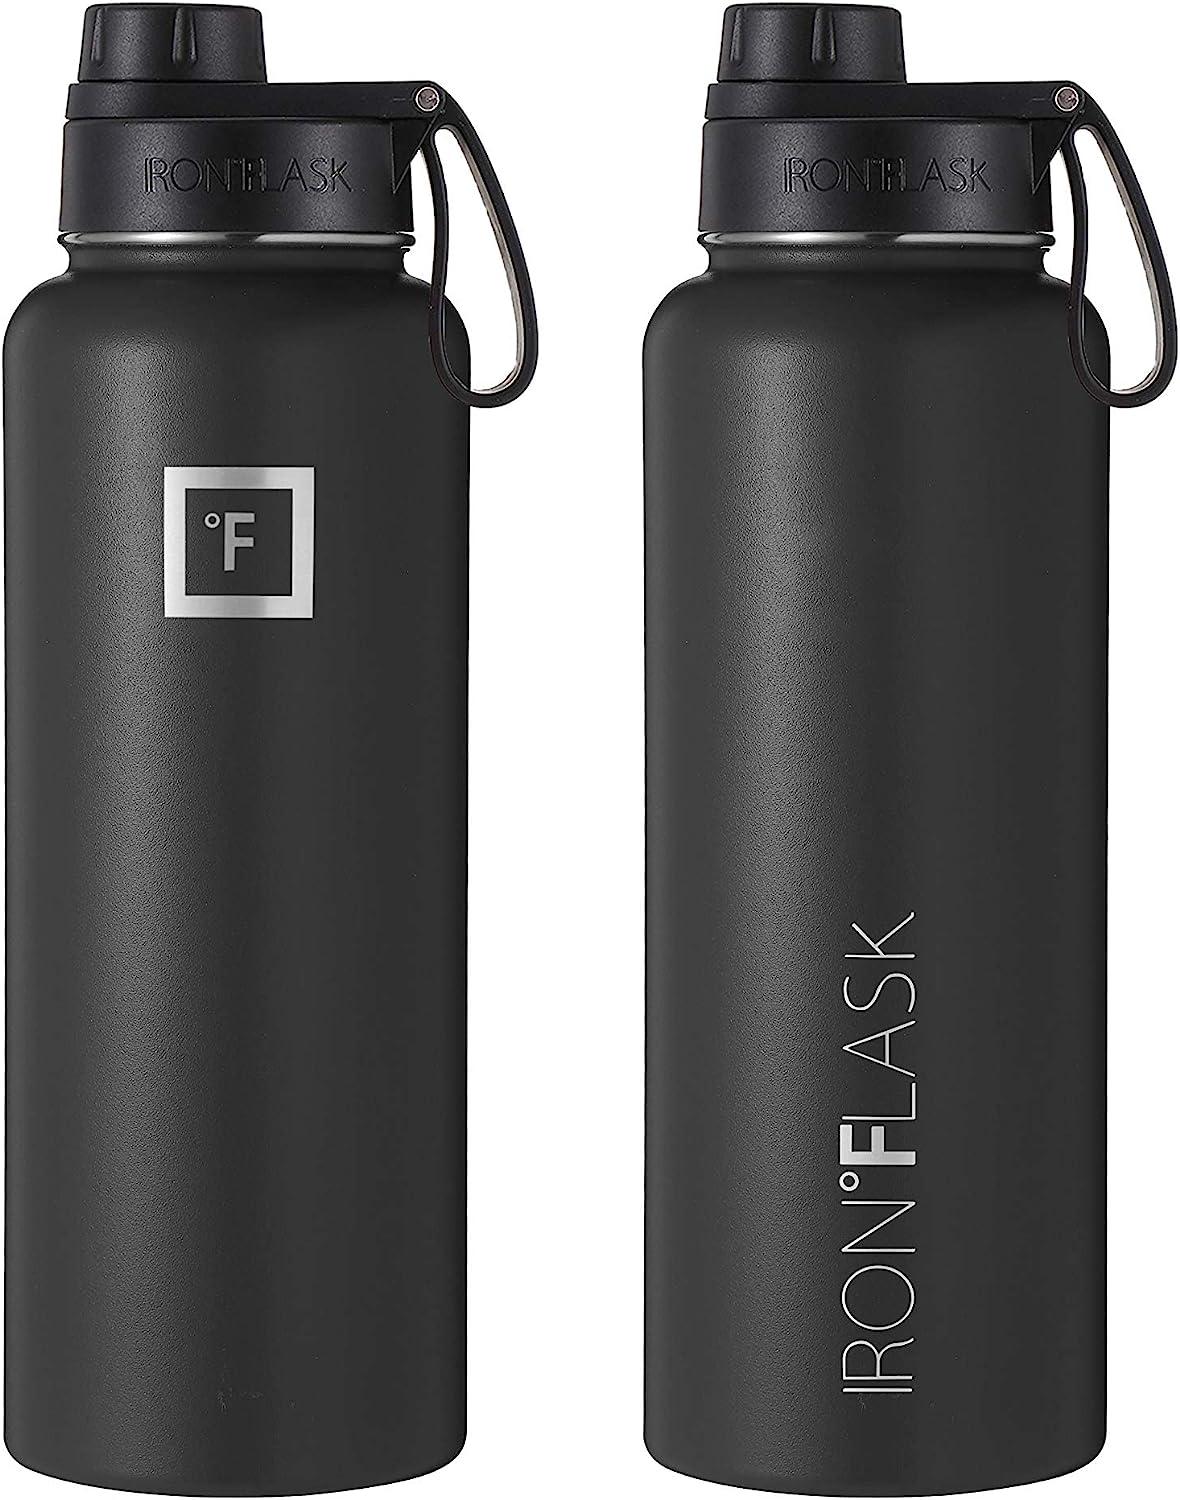 Iron Flask 32oz Sports Water Bottle - 3 Lids, Leak Proof, Double Walled Vacuum Insulated Cotton Candy